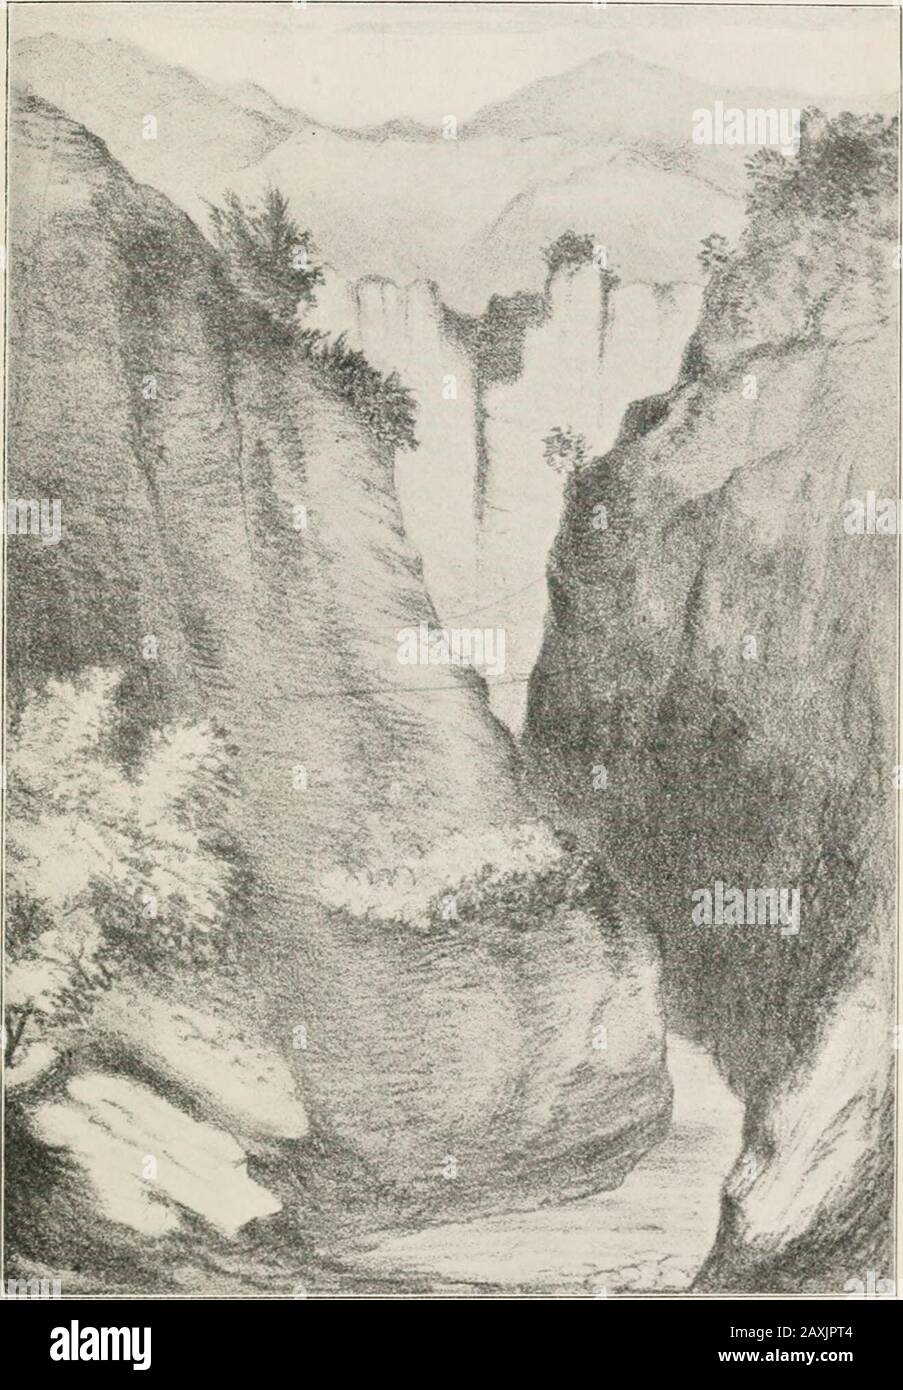 Schlich's Manual of forestry . heep and goatsthe natural growth disappeared, while the tread of thebeasts loosened the soil. The annual monsoon rains, thoughnot heavy, soon commenced a process of erosion and of carry-ing away the surface soil. Gradually, small and then largeravines and torrents were formed which have torn the hillrange into the most fantastic shapes, while the debris hasbeen carried into the plains forming fan-shaped accumulationsof sand. These, commencing at the places where the torrentsemerge from the hills, reach for miles into the plain, andhave already covered and rendere Stock Photo